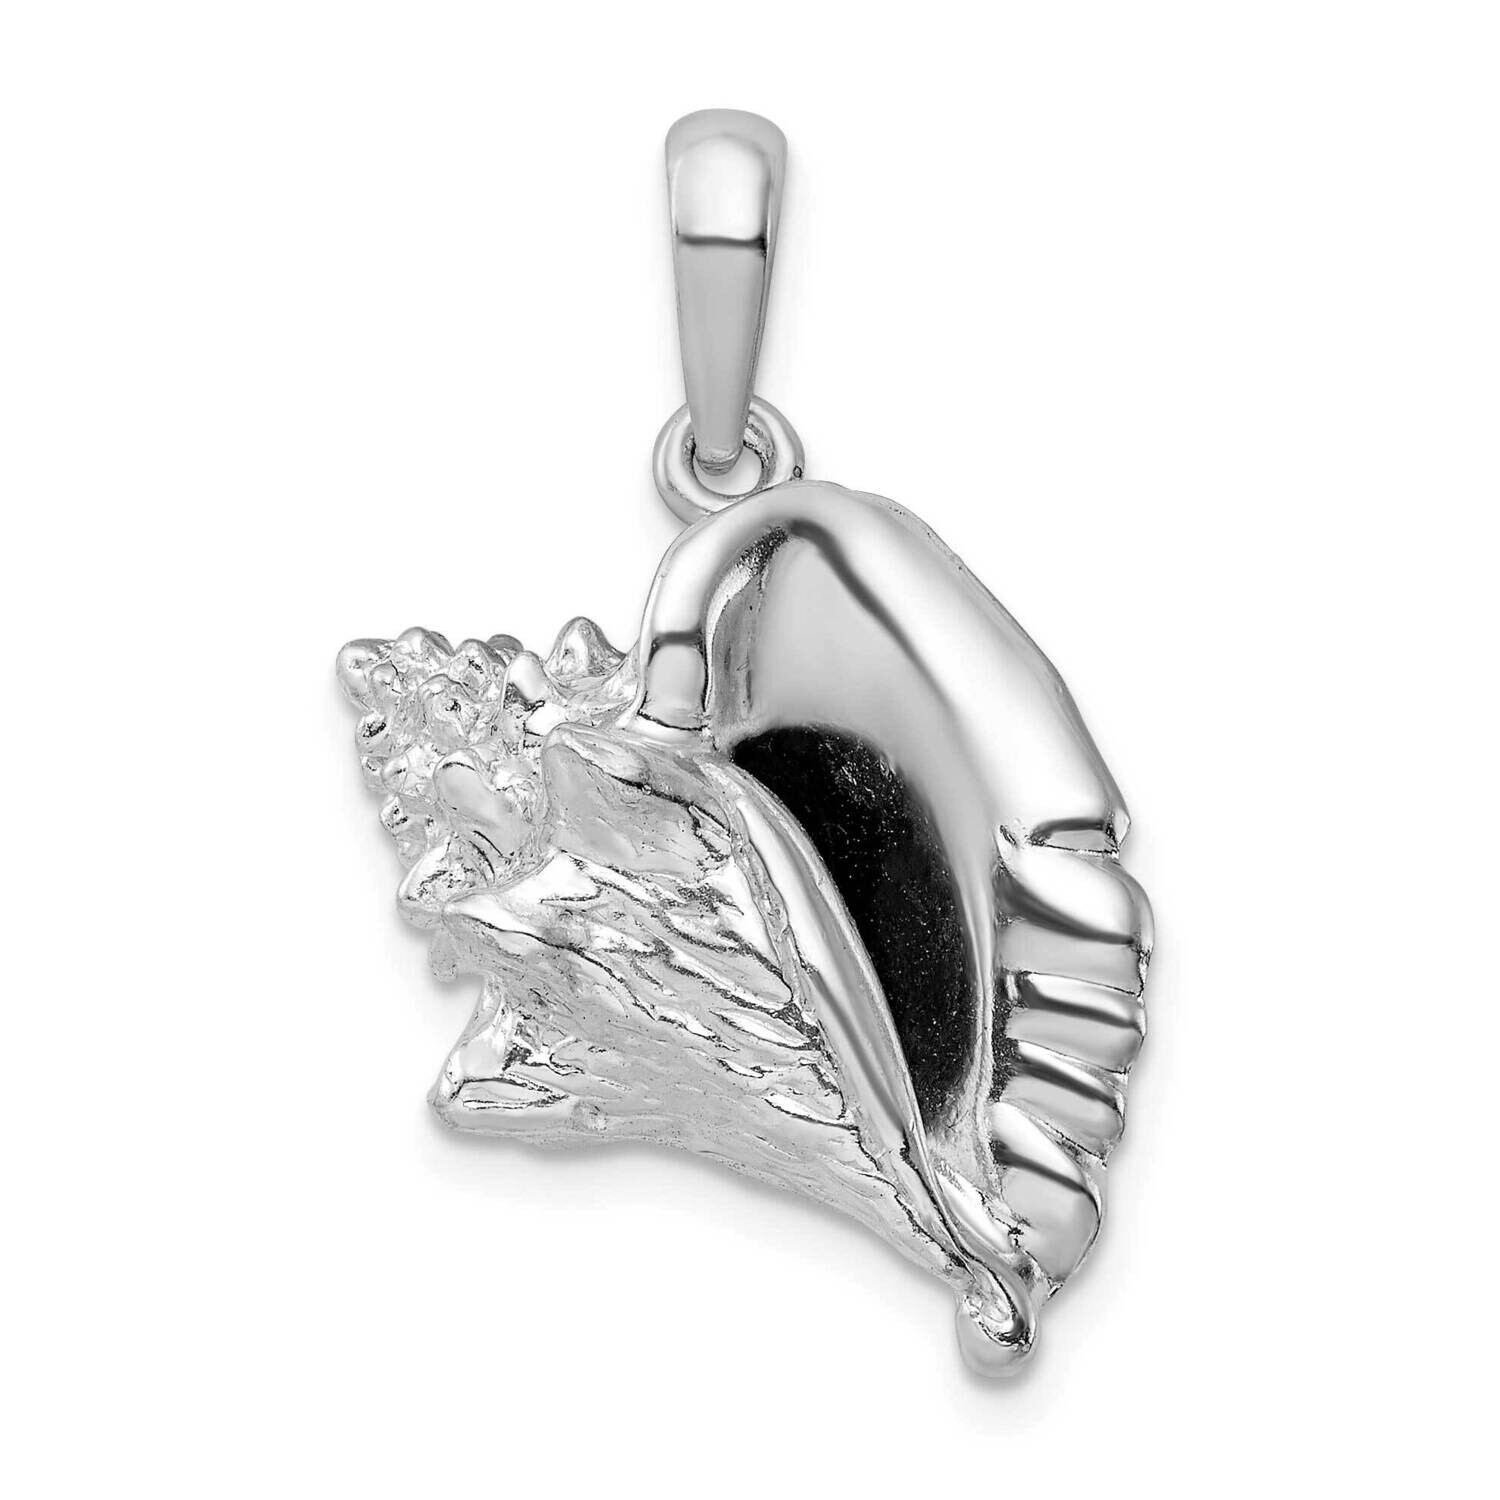 3D Large Conch Shell Pendant Sterling Silver Polished QC9905